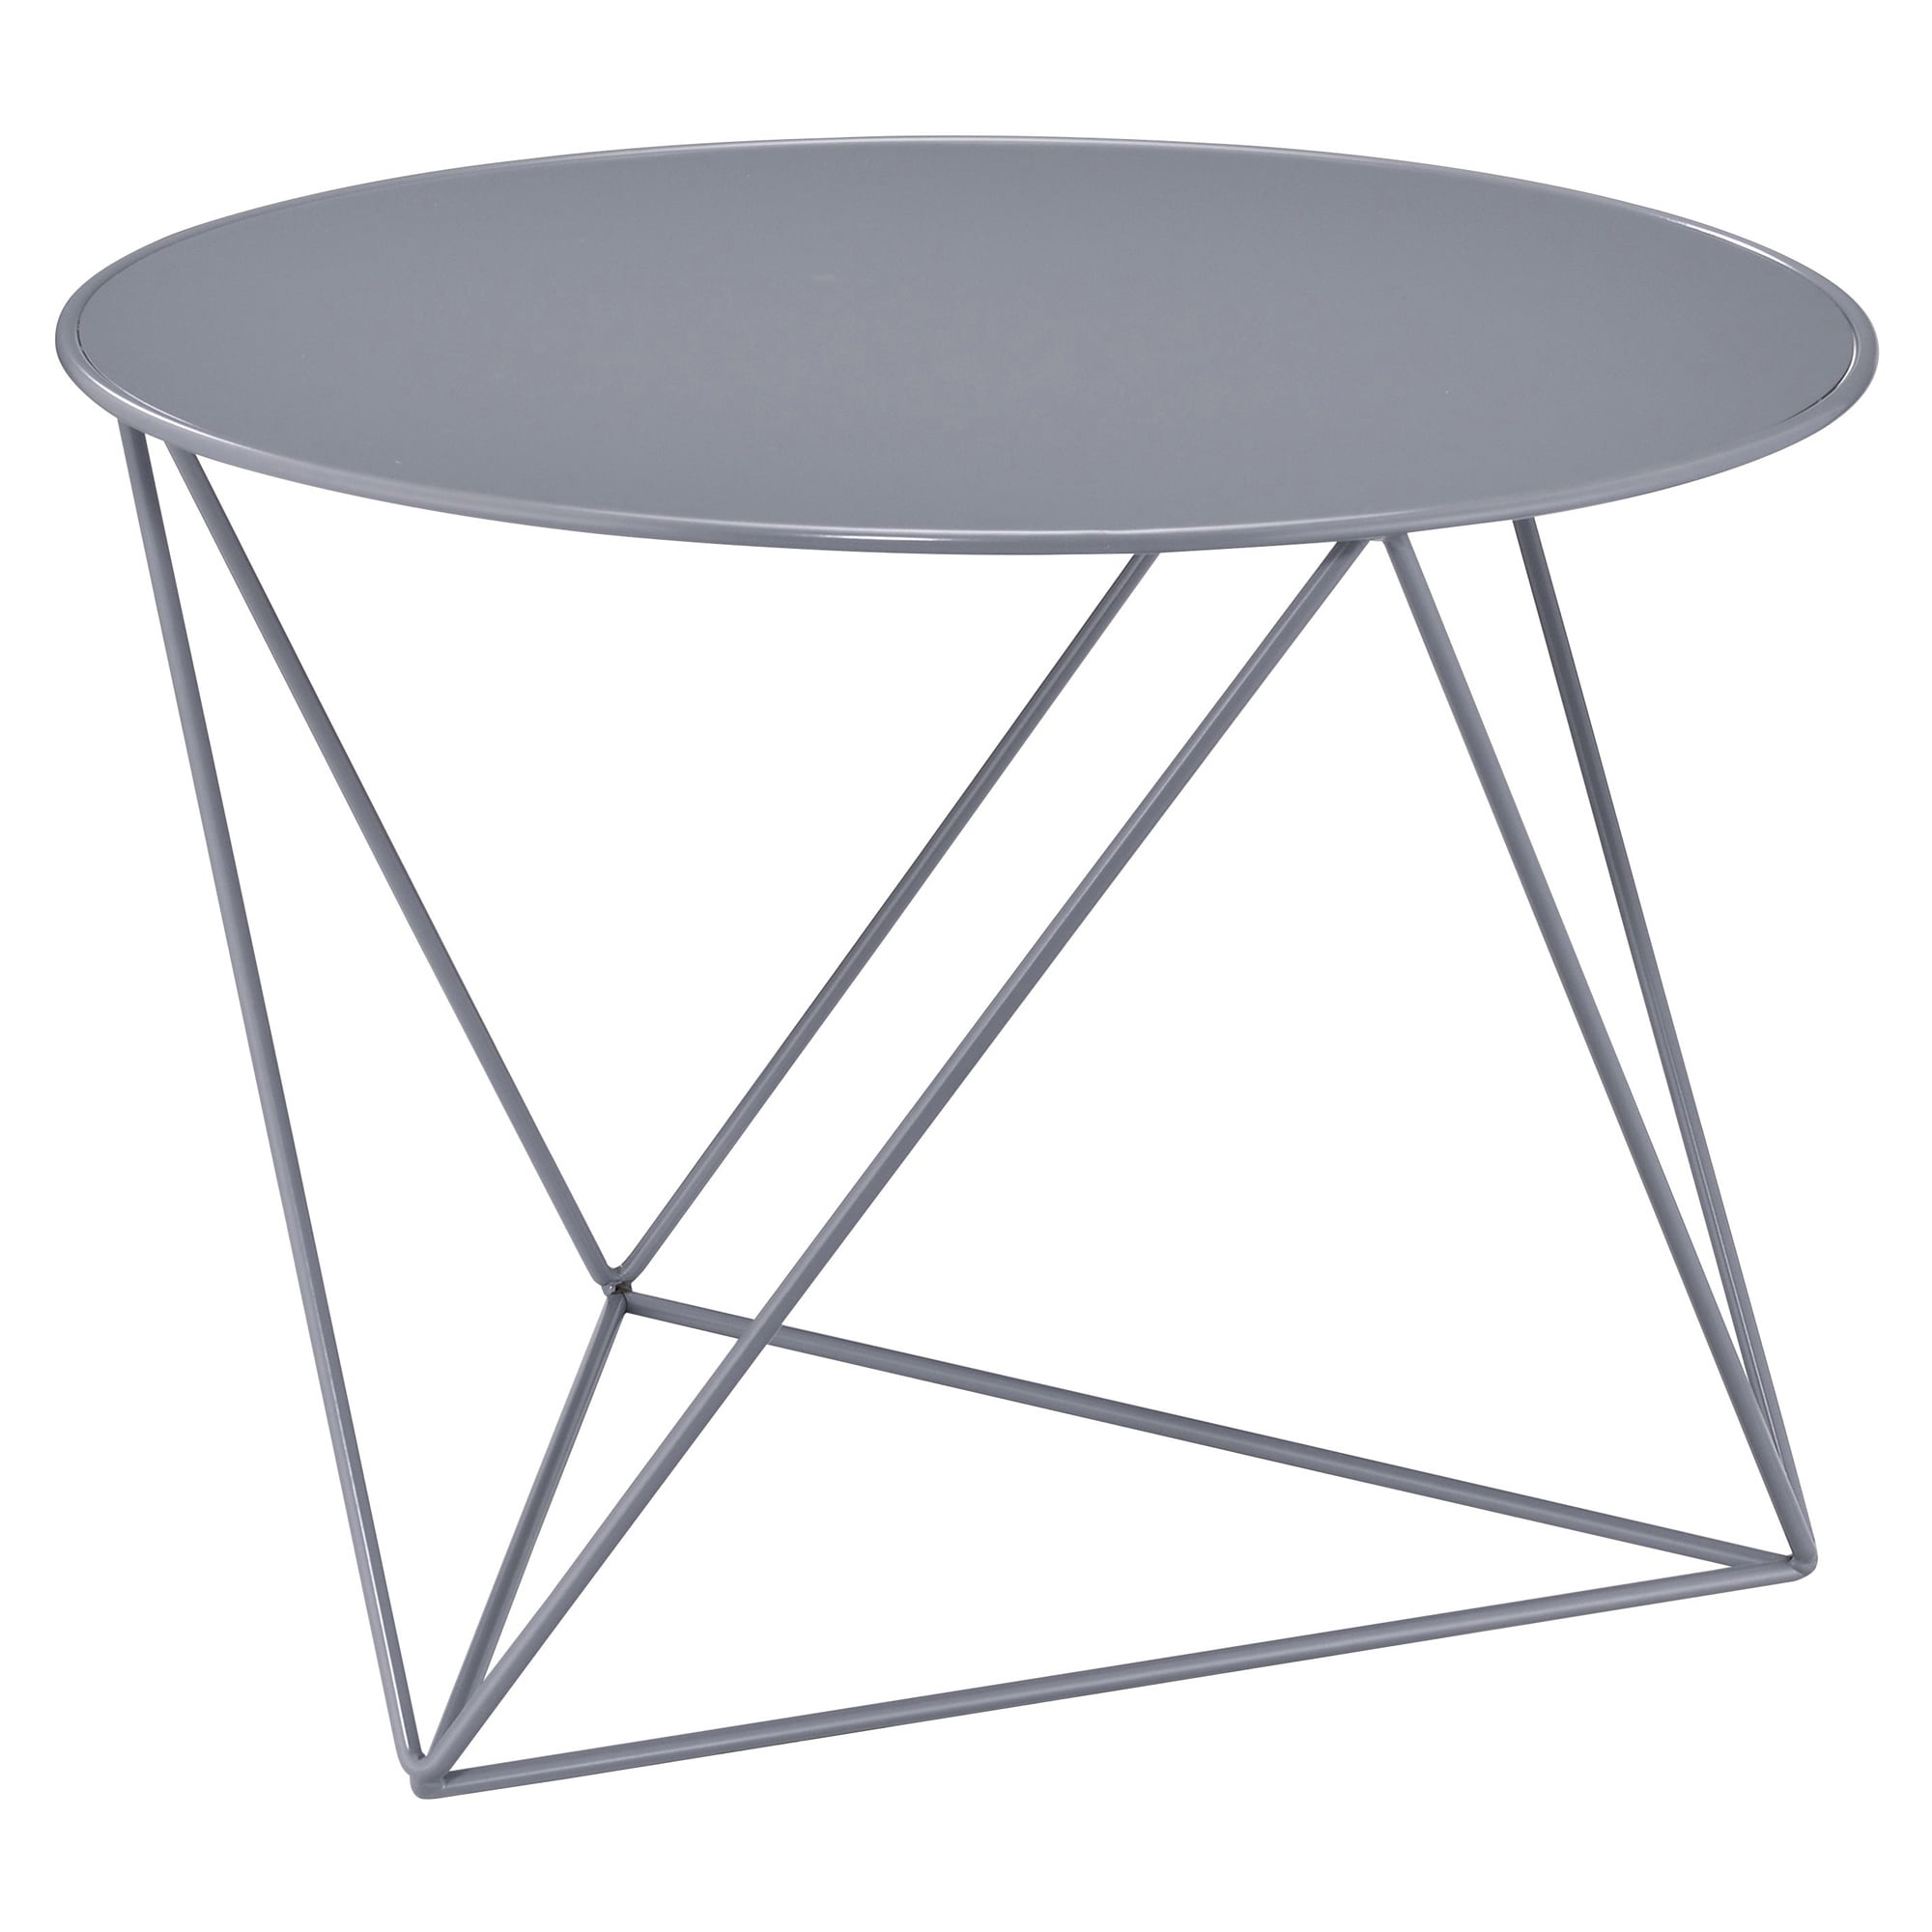 Picture of Acme Furniture 97843 17 x 23 x 23 in. Epidia Round Accent Table, Gray